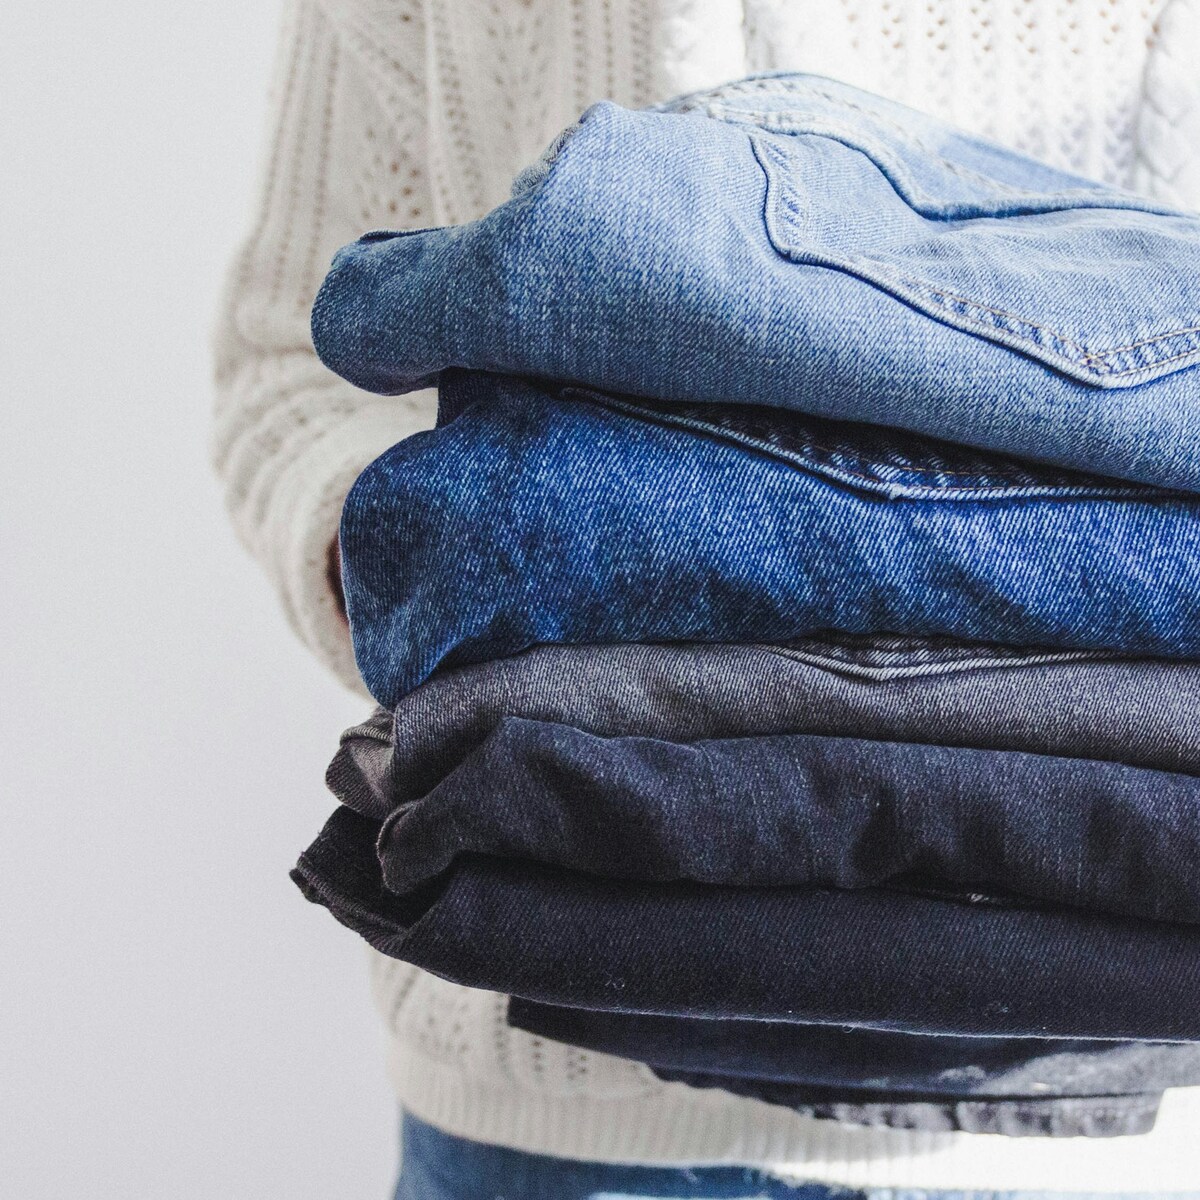 A person holding a pile of folded denim